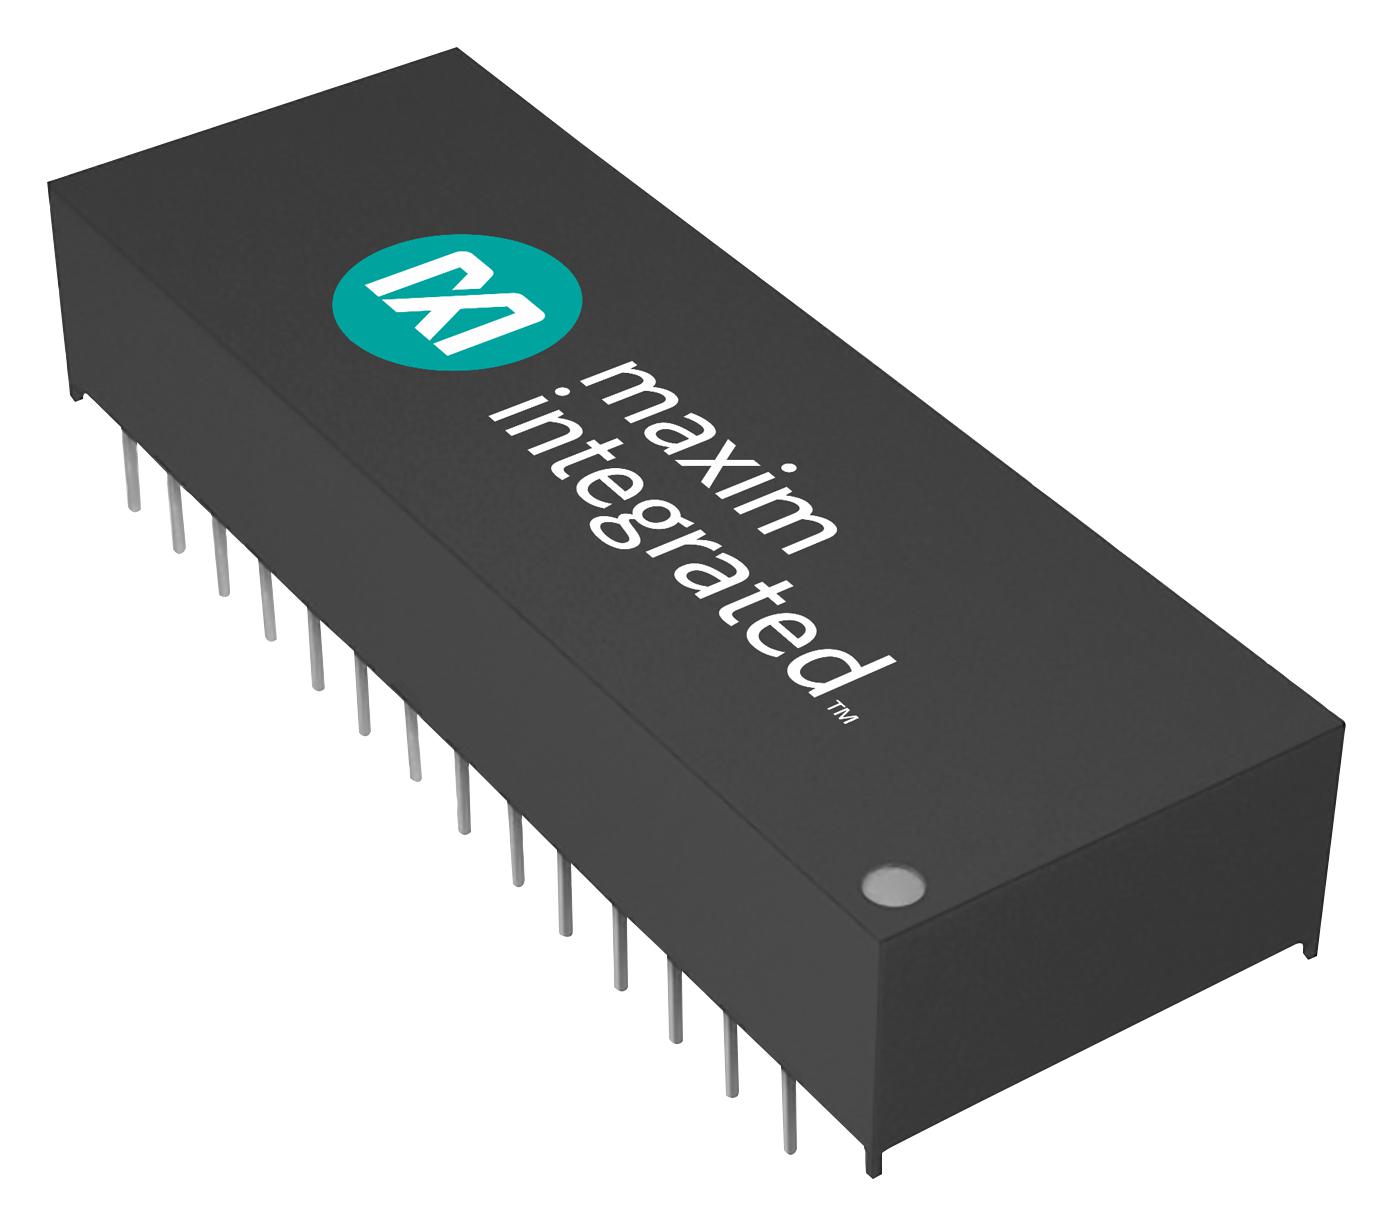 DS1230Y-200IND+ NON-VOLATILE SRAM, 256KBIT, 200NS, EDIP MAXIM INTEGRATED / ANALOG DEVICES